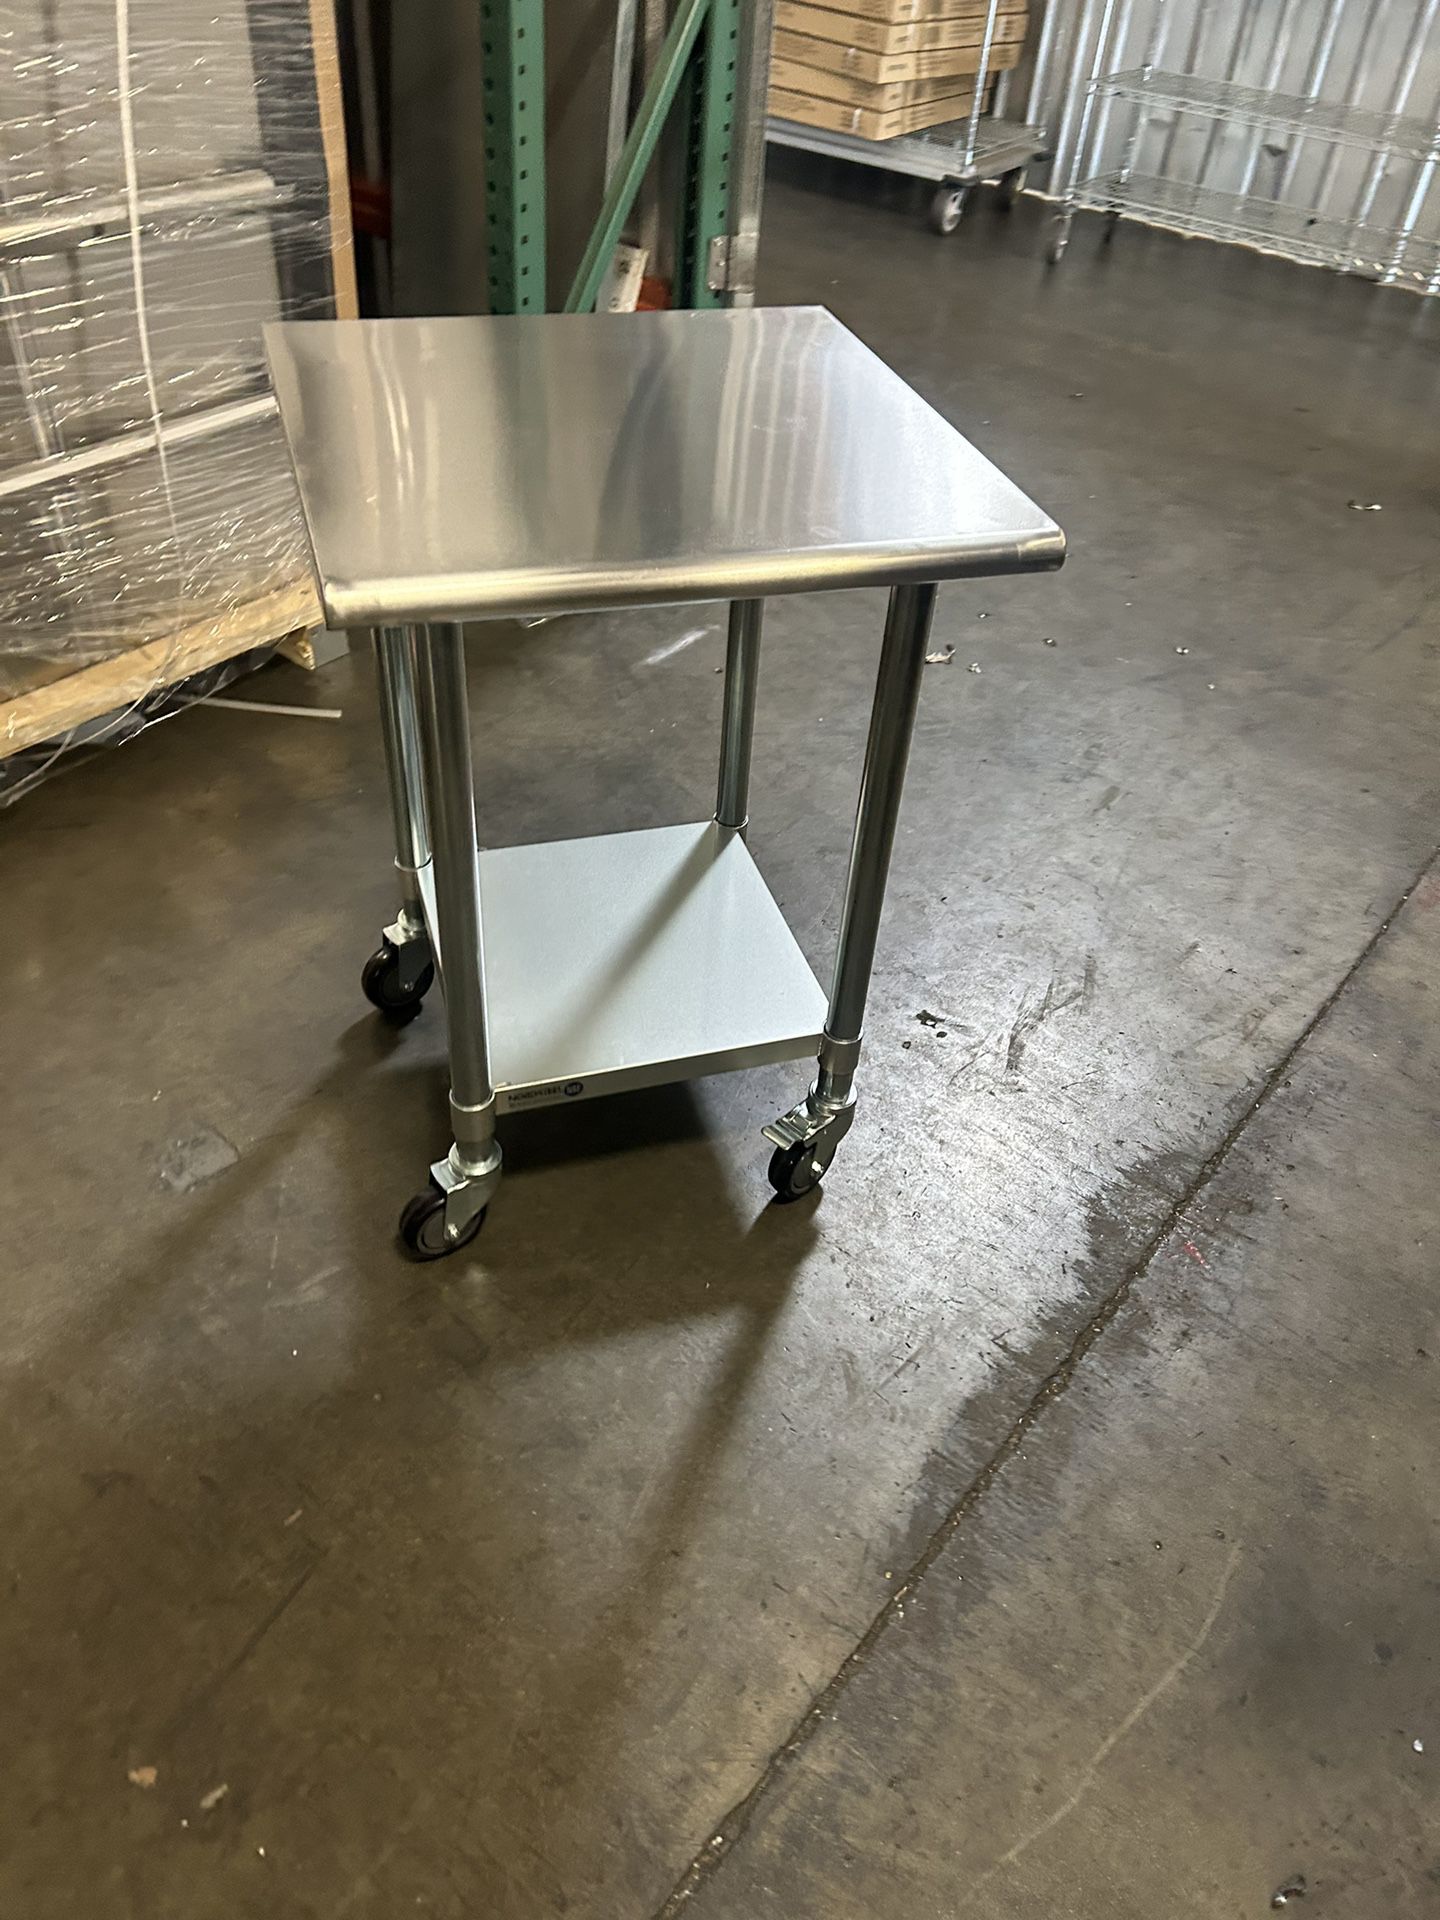 New Stainless Steel Kitchen Table For Restaurant Home Kitchen Workshops 